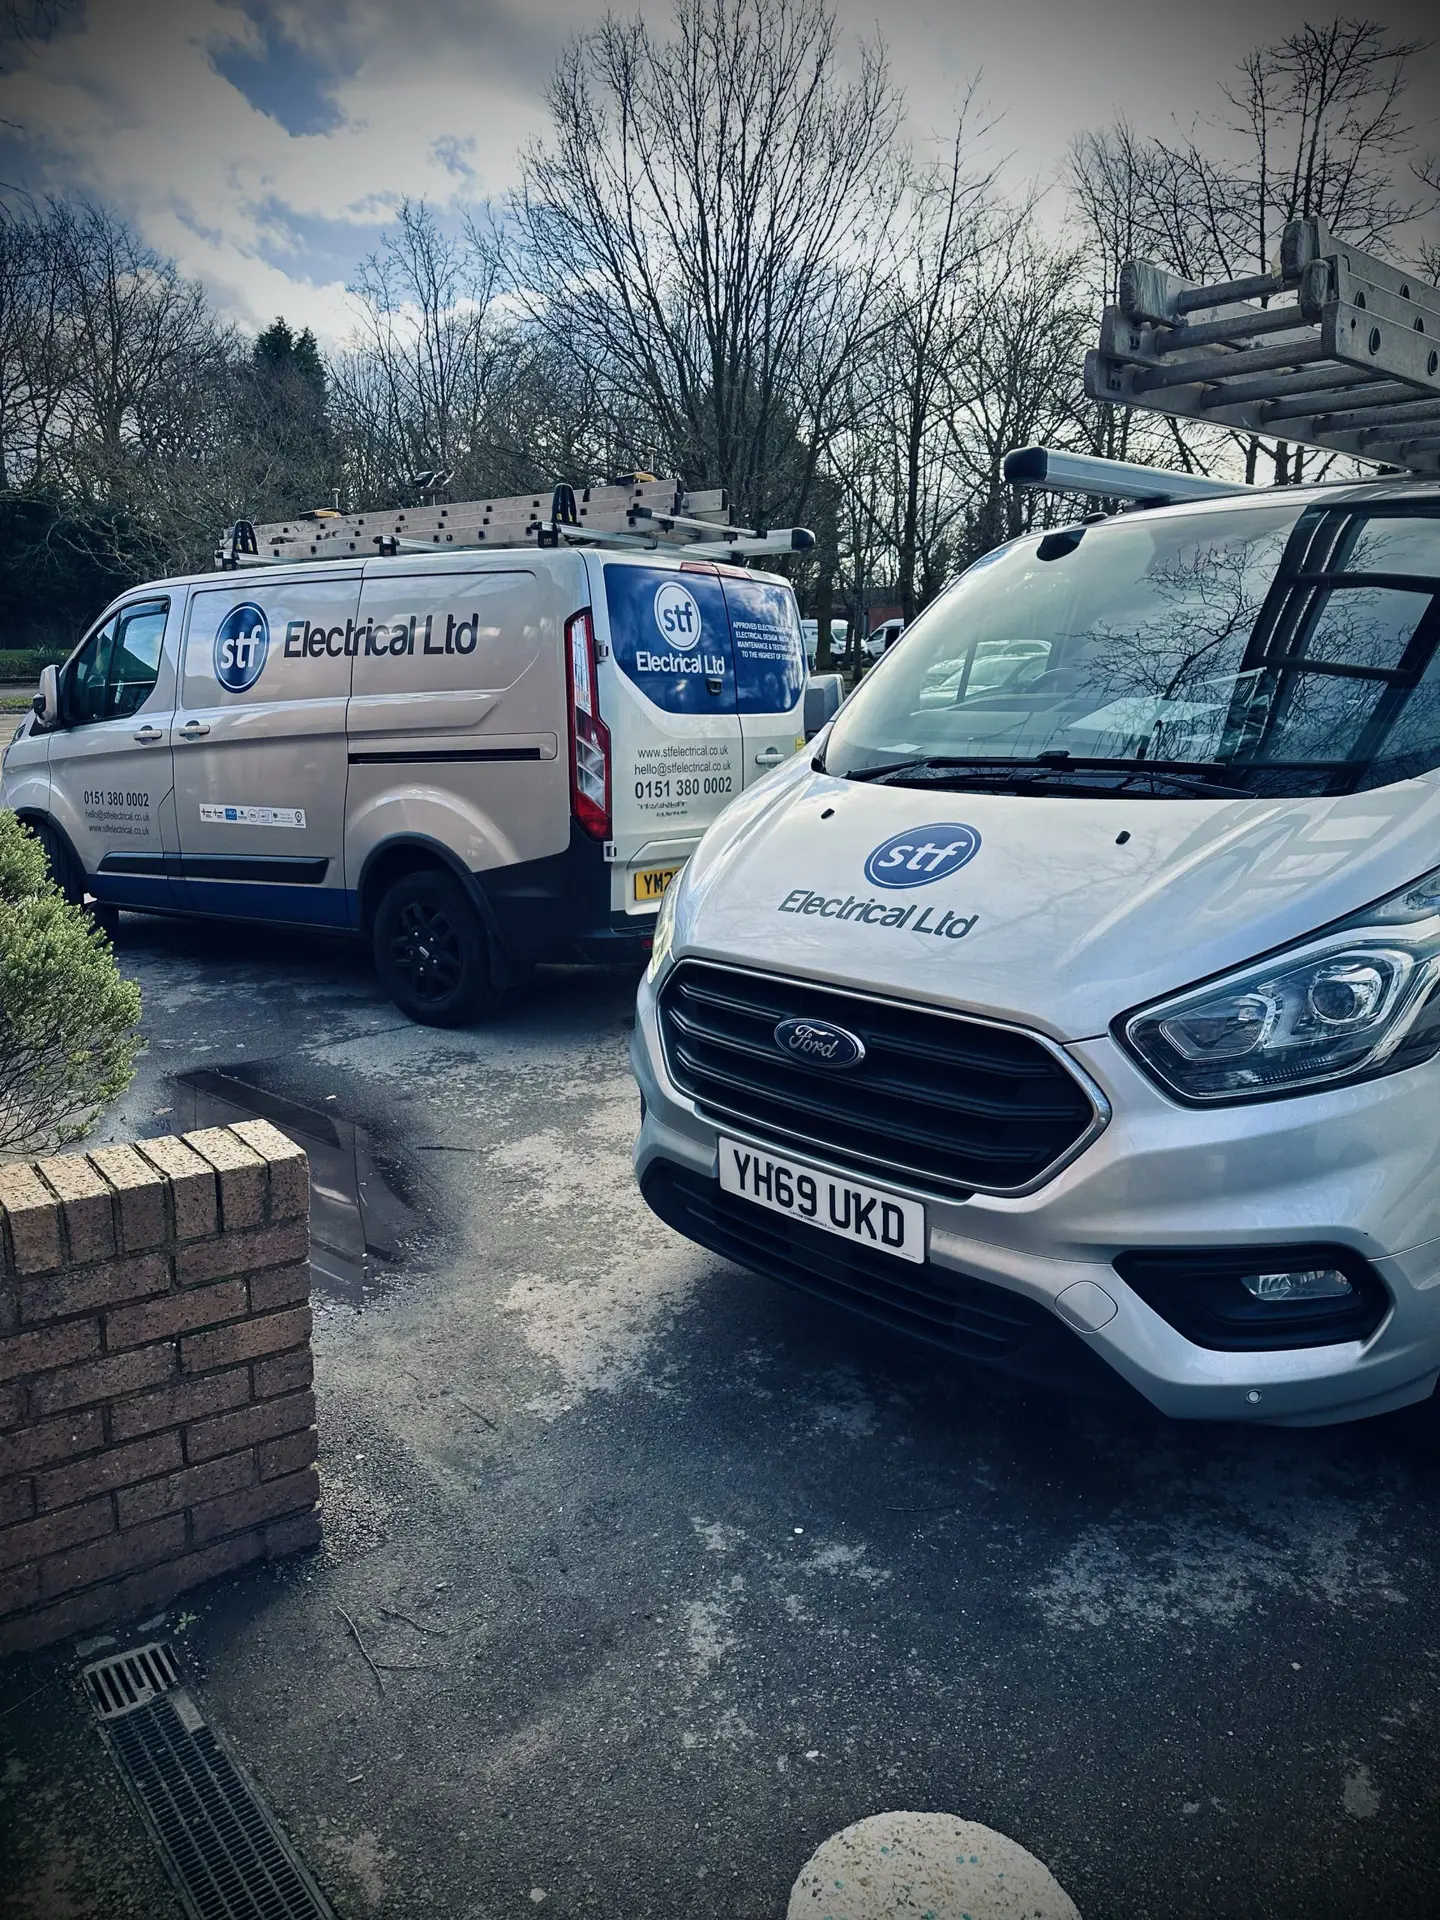 Two STF Electrical Ltd vans parked outside a high school undergoing a rewire project, showcasing our commitment to quality electrical services.